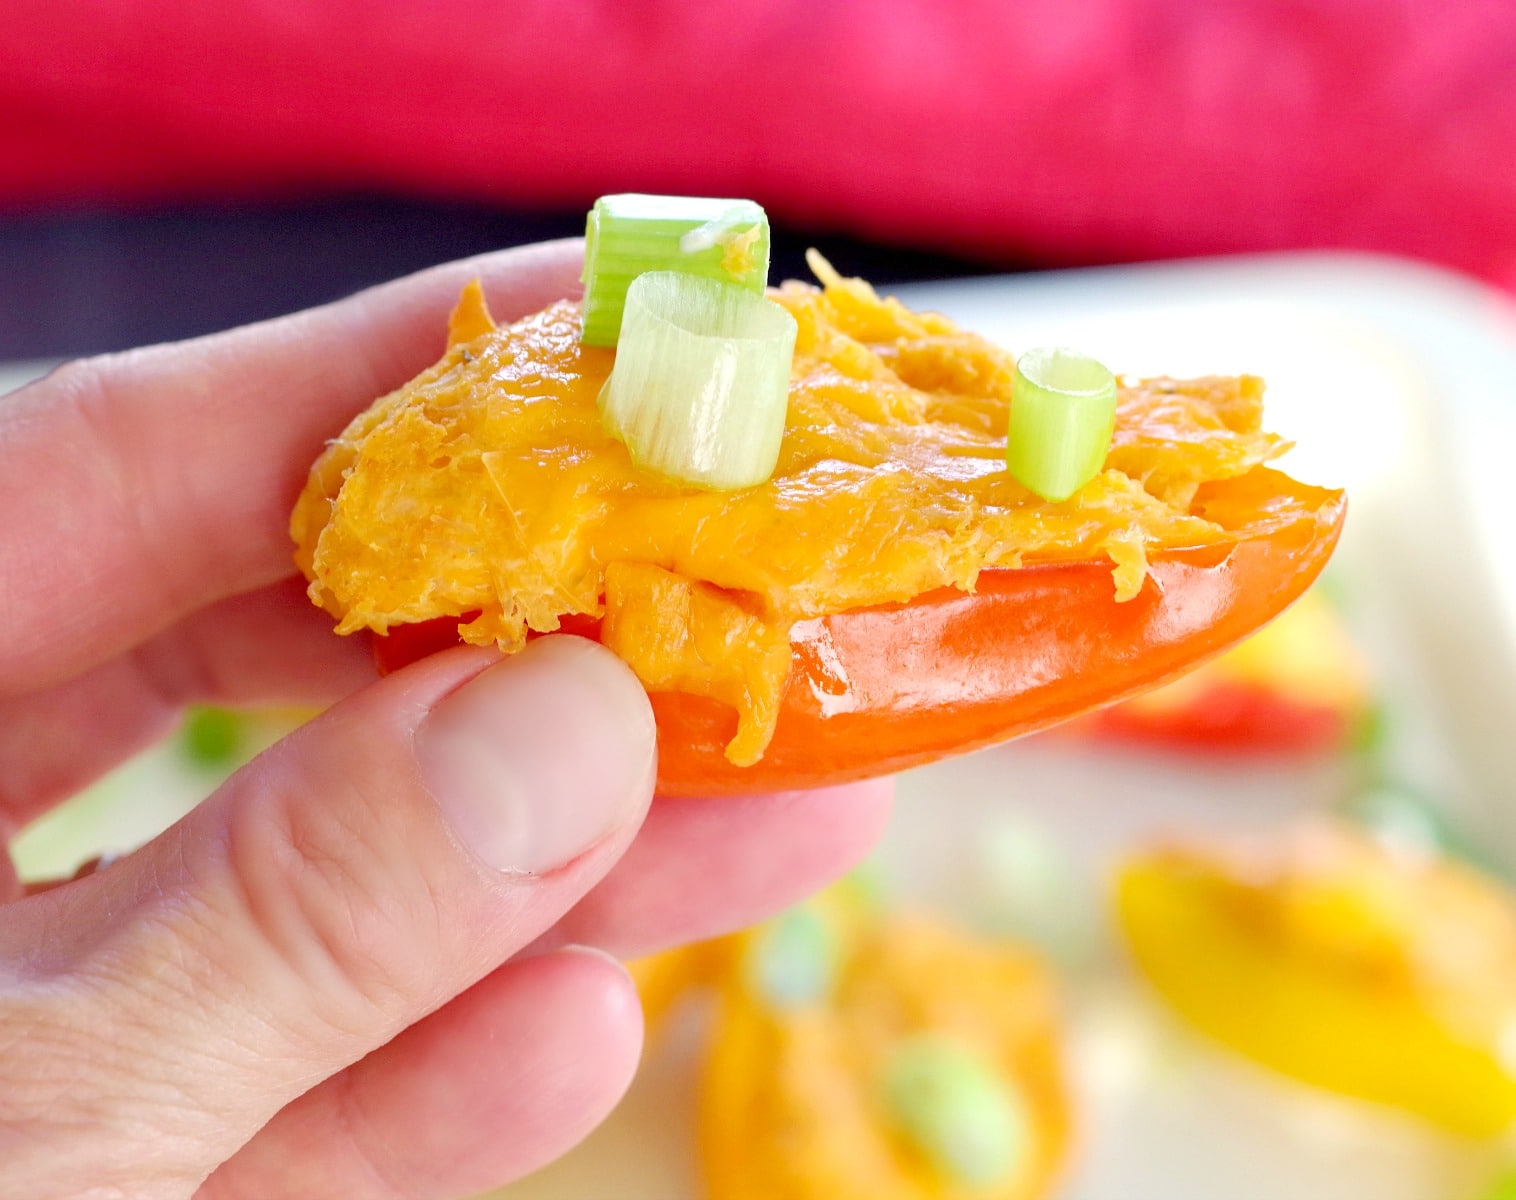 buffalo chicken stuffed mini pepper being held up between thumb and fingers